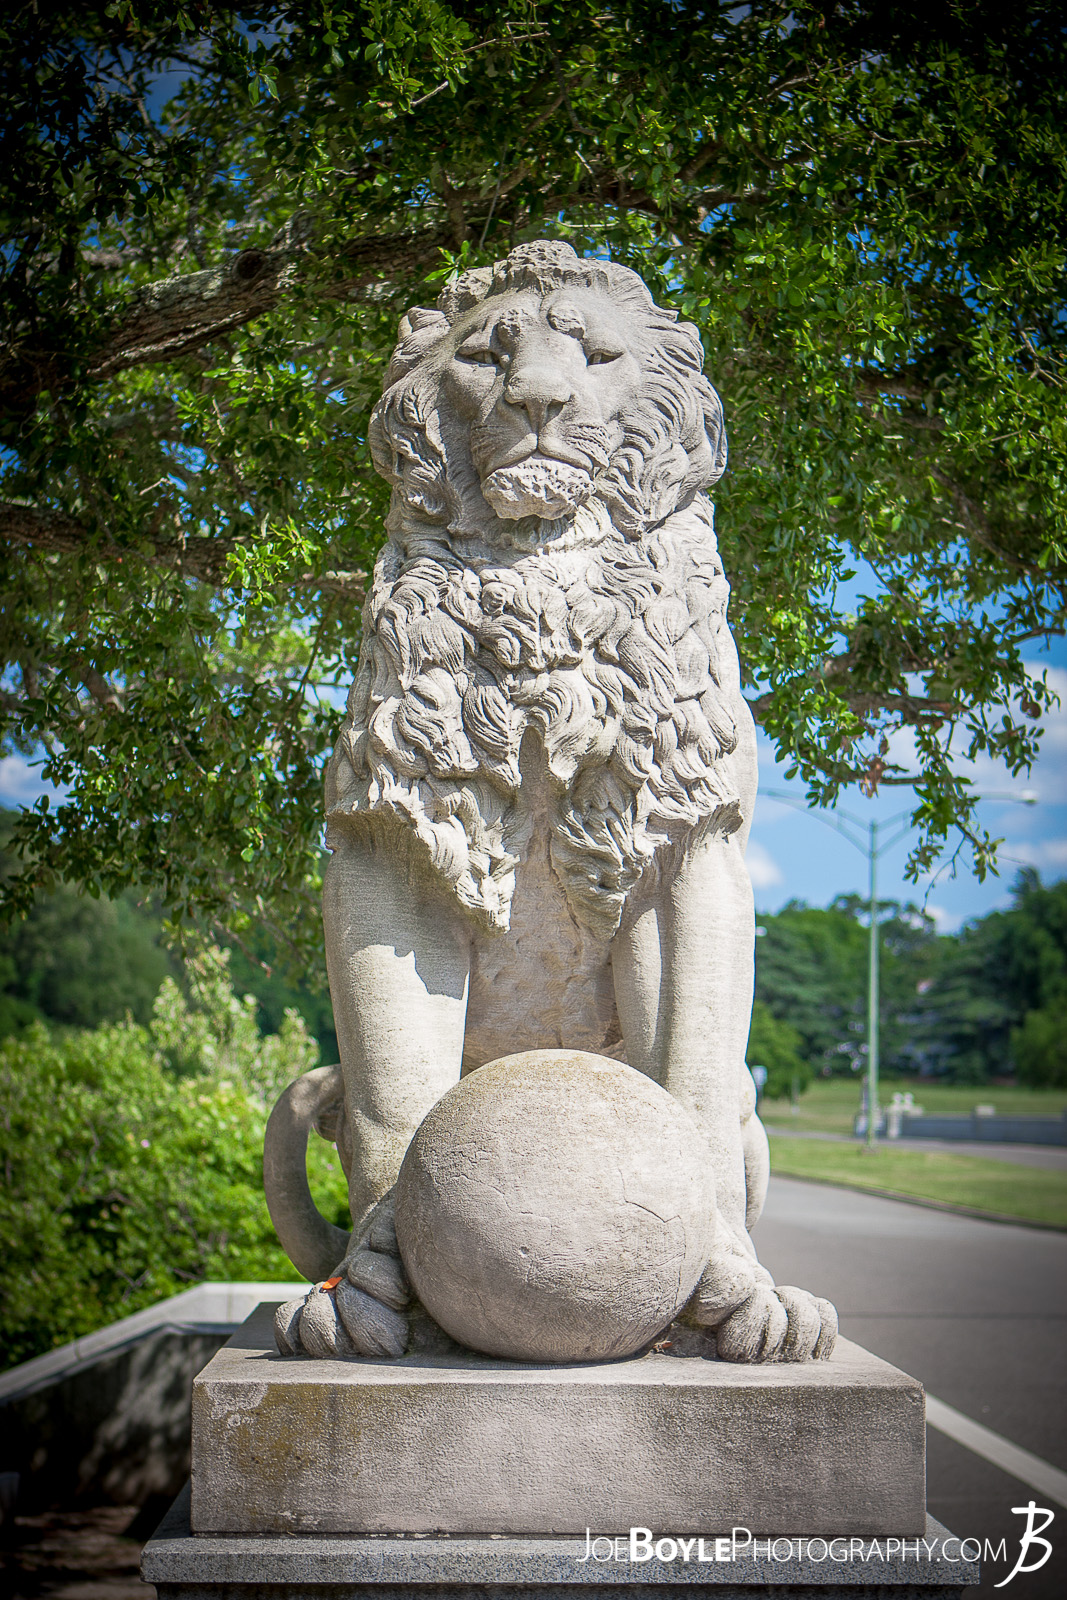  When I was visiting friends in Virginia this past summer we made it a point to see some of the historical sites in the area. One of which included the Mariner's Museum. This is an image of 1 of the 4 Lion Statues on the bridge, which is really a dam that creates Lake Maury and provides a great view of the James River. 